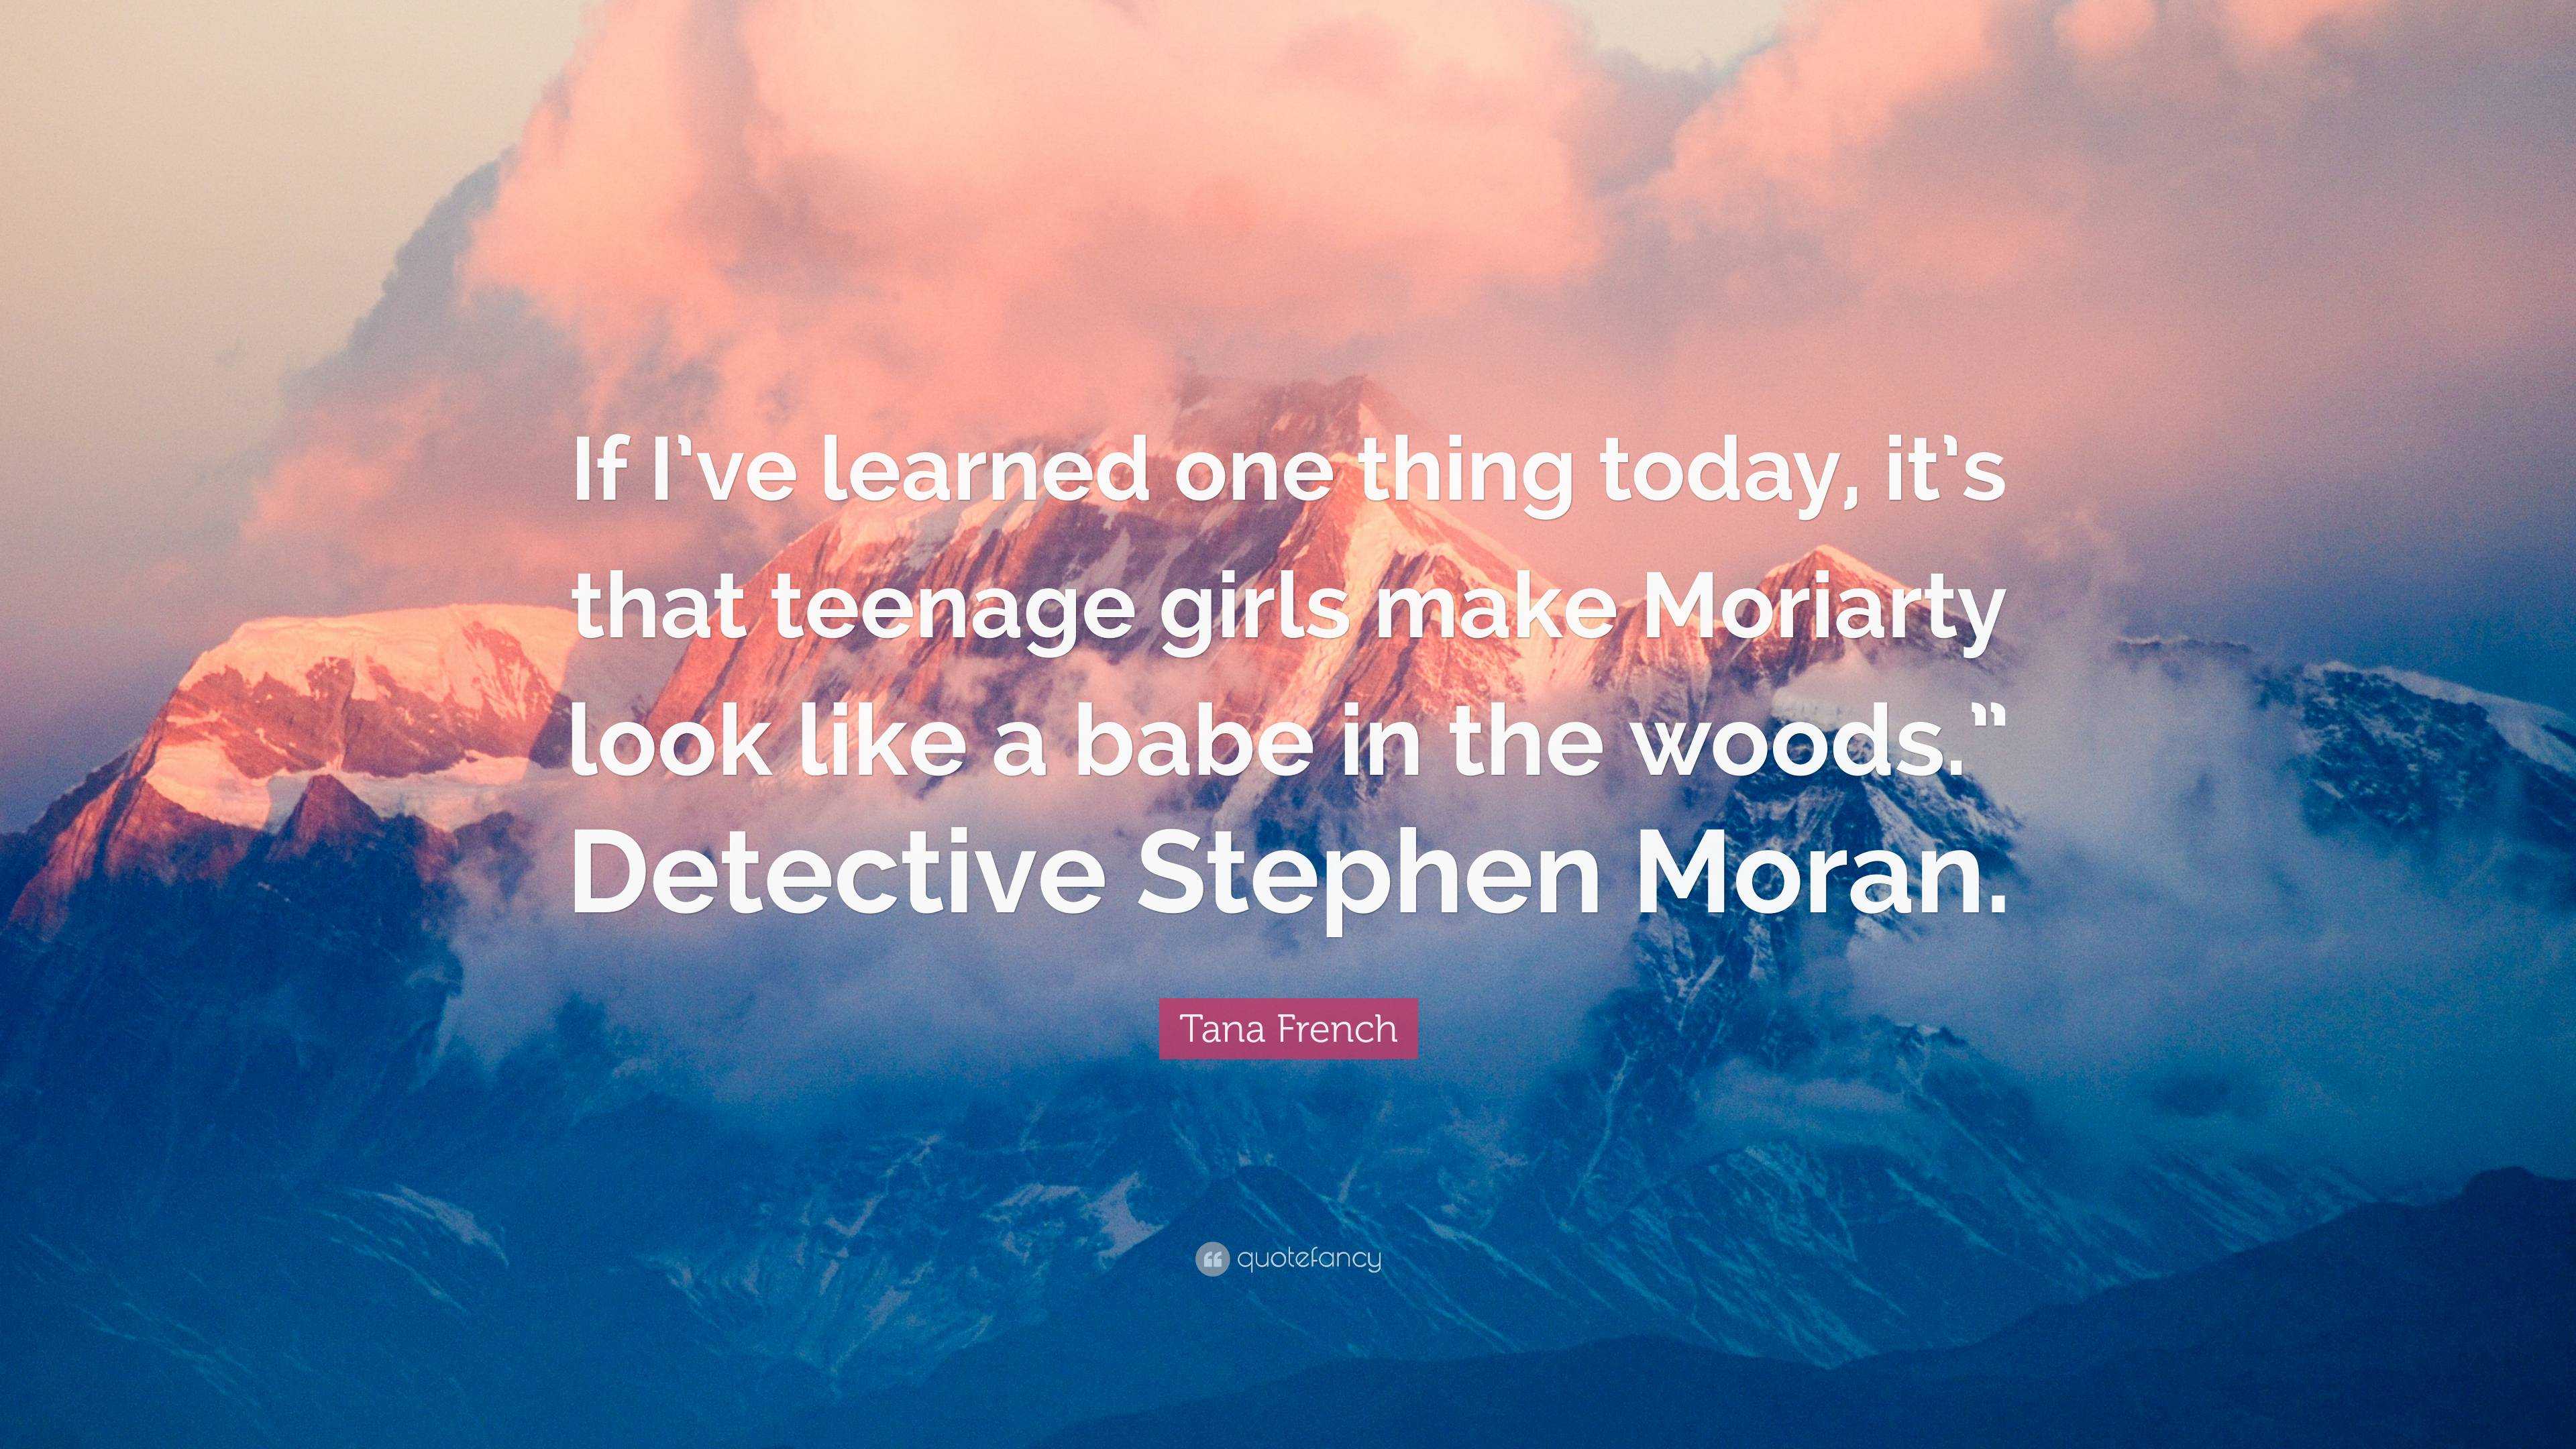 Tana French Quote If I Ve Learned One Thing Today It S That Teenage Girls Make Moriarty Look Like A Babe In The Woods Detective Stephen